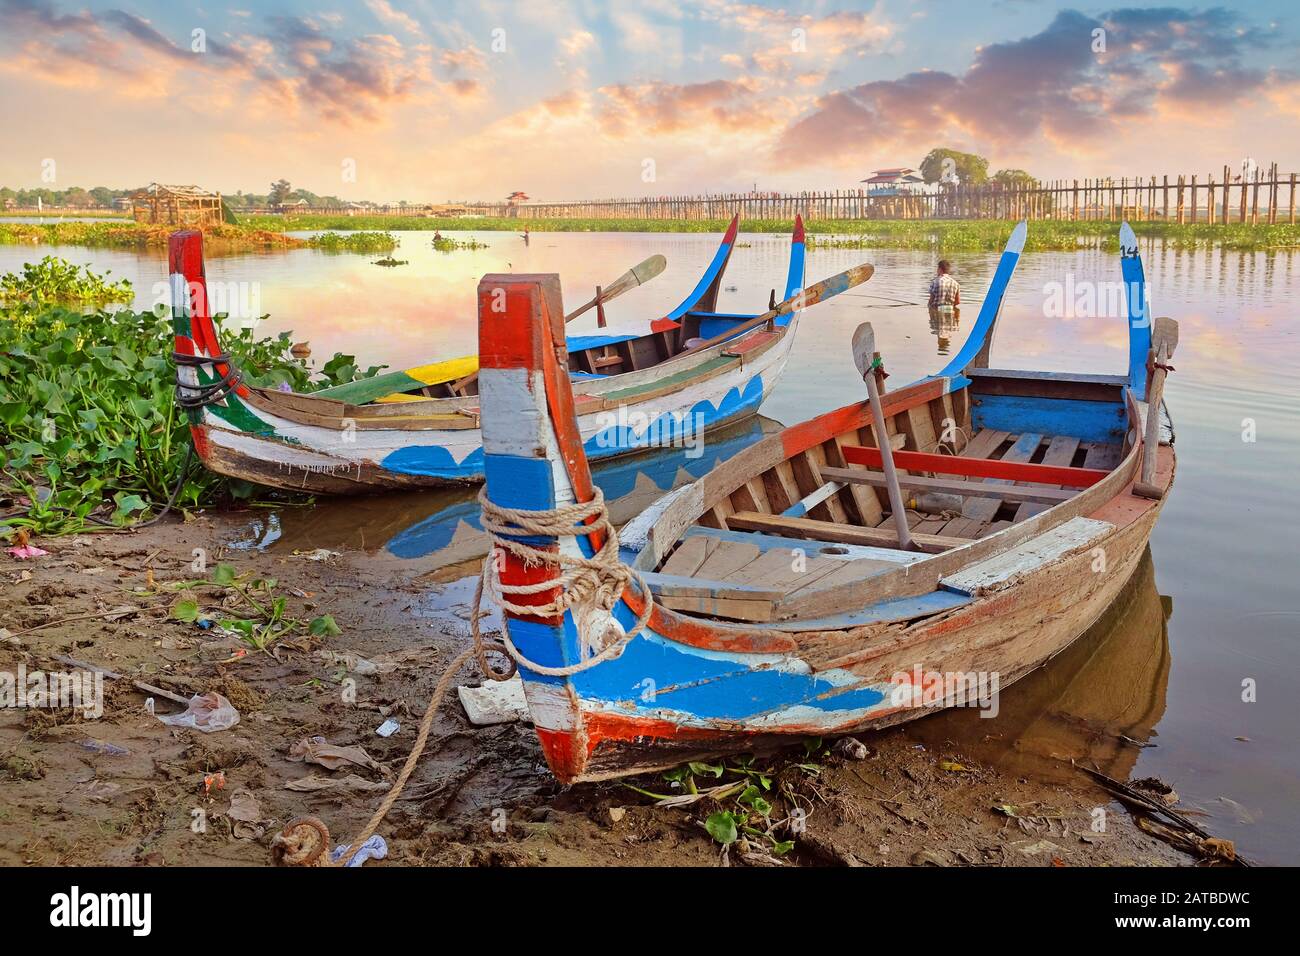 Colorful traditional boats on the side of the Taung Tha Man Lake, near Mandalay, Myanmar, surrounded by green vegetation, against a beautiful colorful Stock Photo